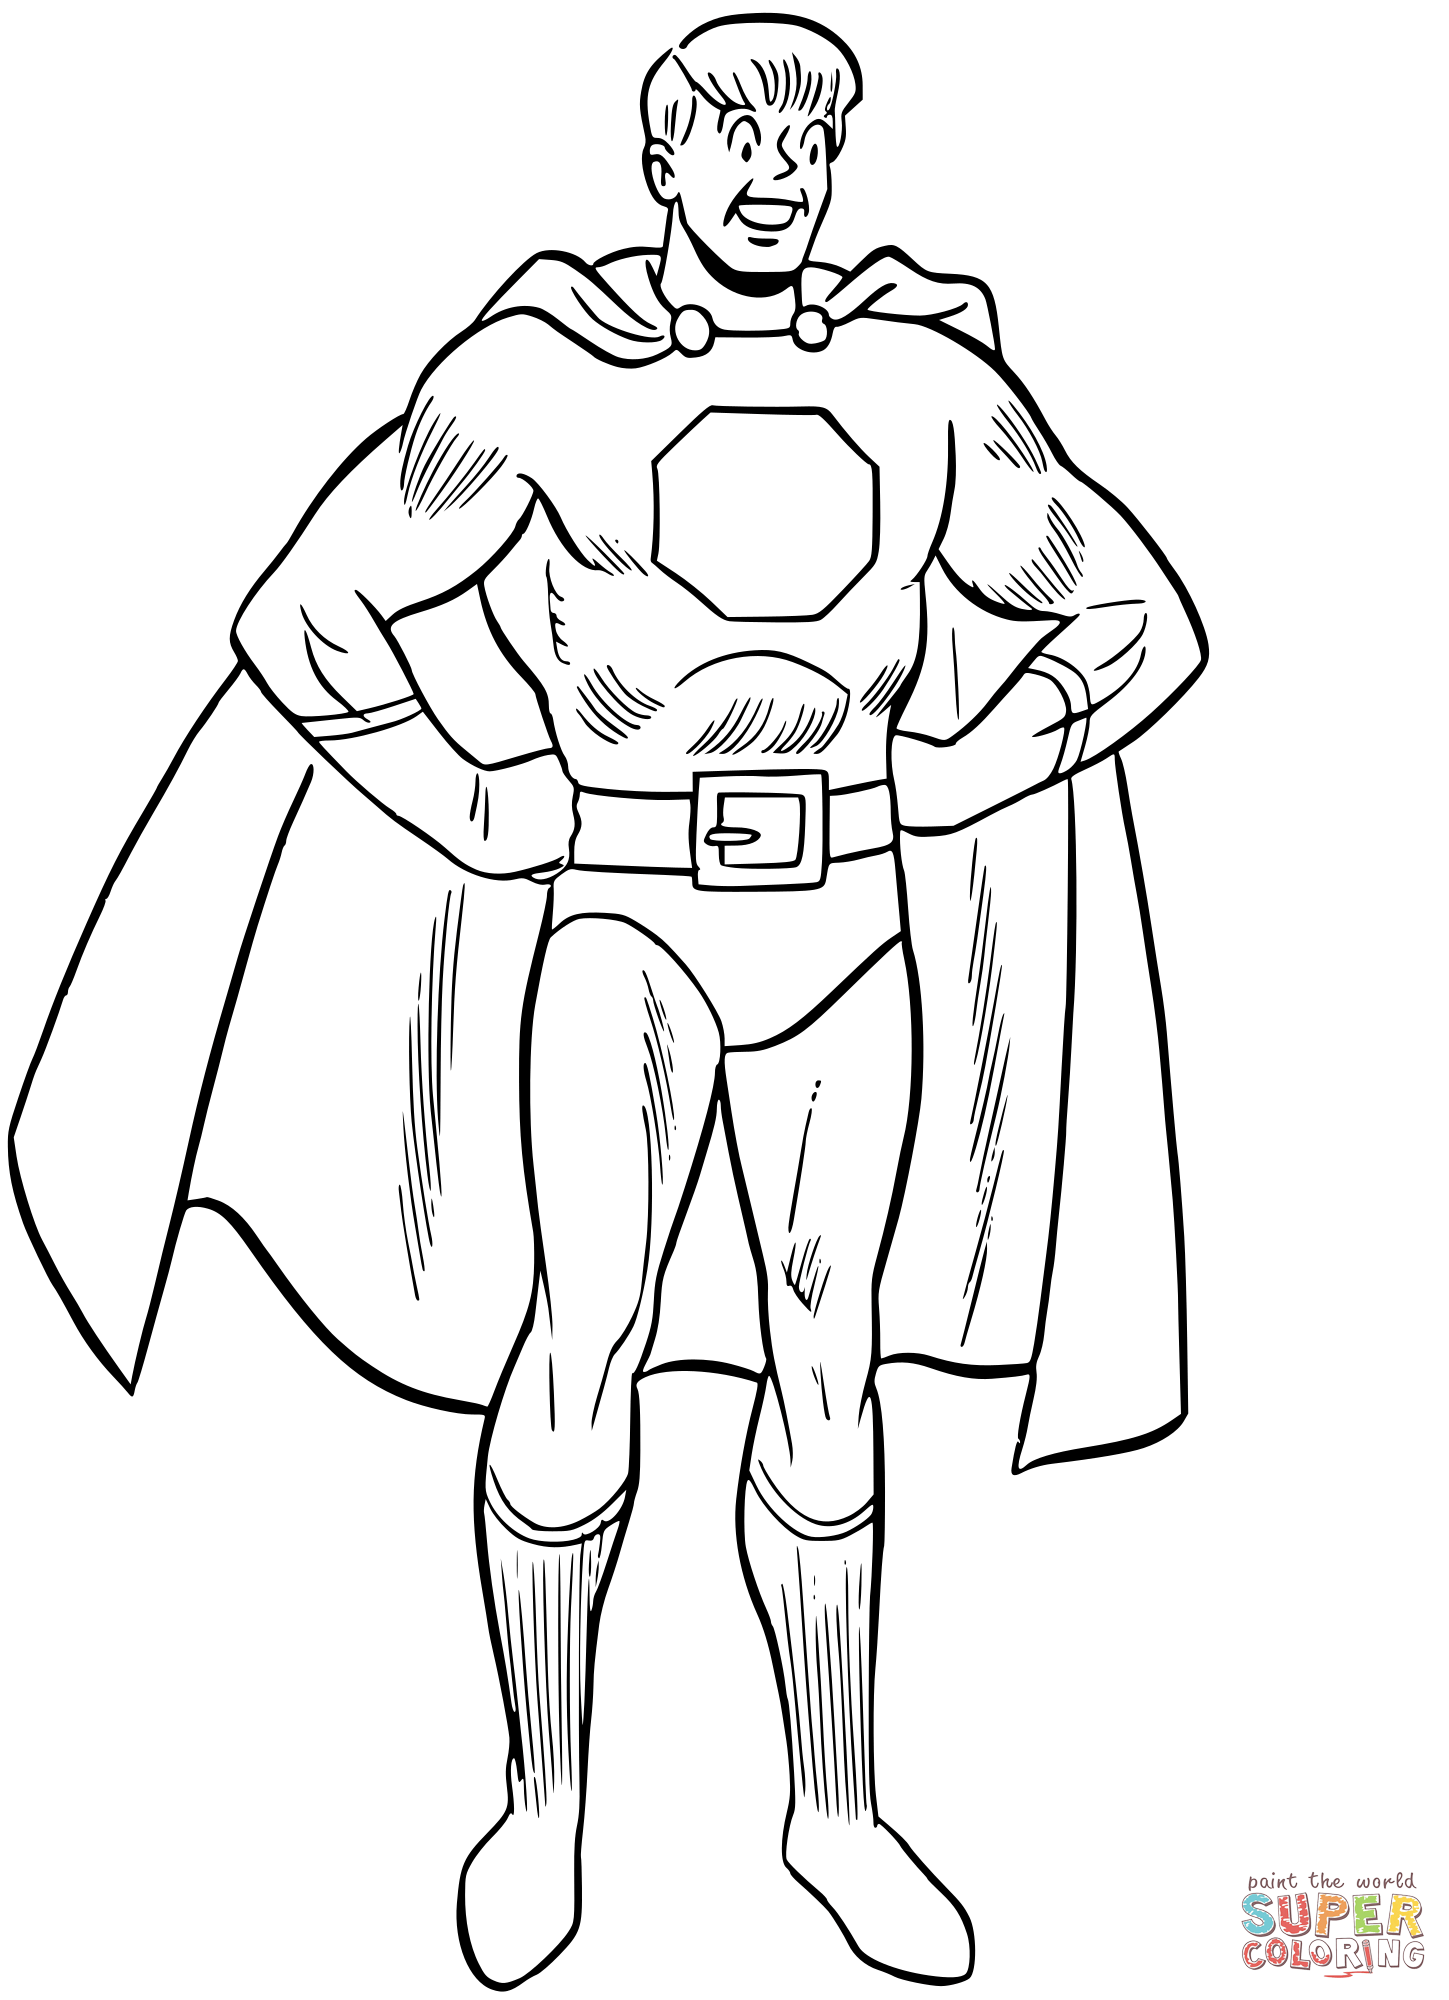 Vintage young man dressed as a superhero coloring page free printable coloring pages